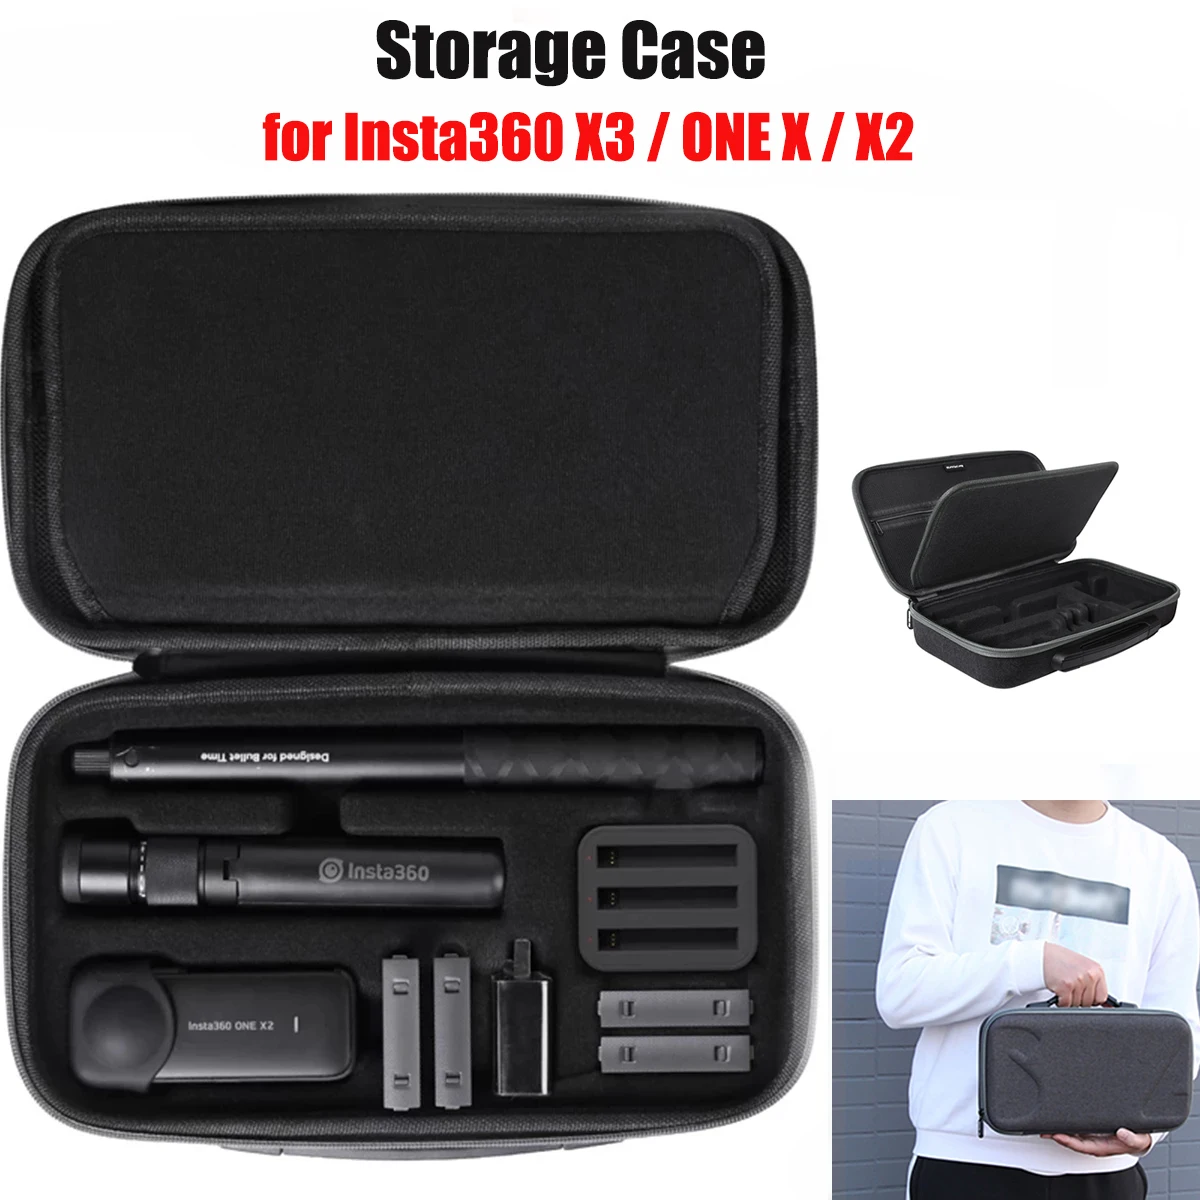 

Fran-T24A Storage Case Carrying Box for Insta360 ONE X3 /X2 /RS/X Portable Panoramic Action Camera Accessories Bag